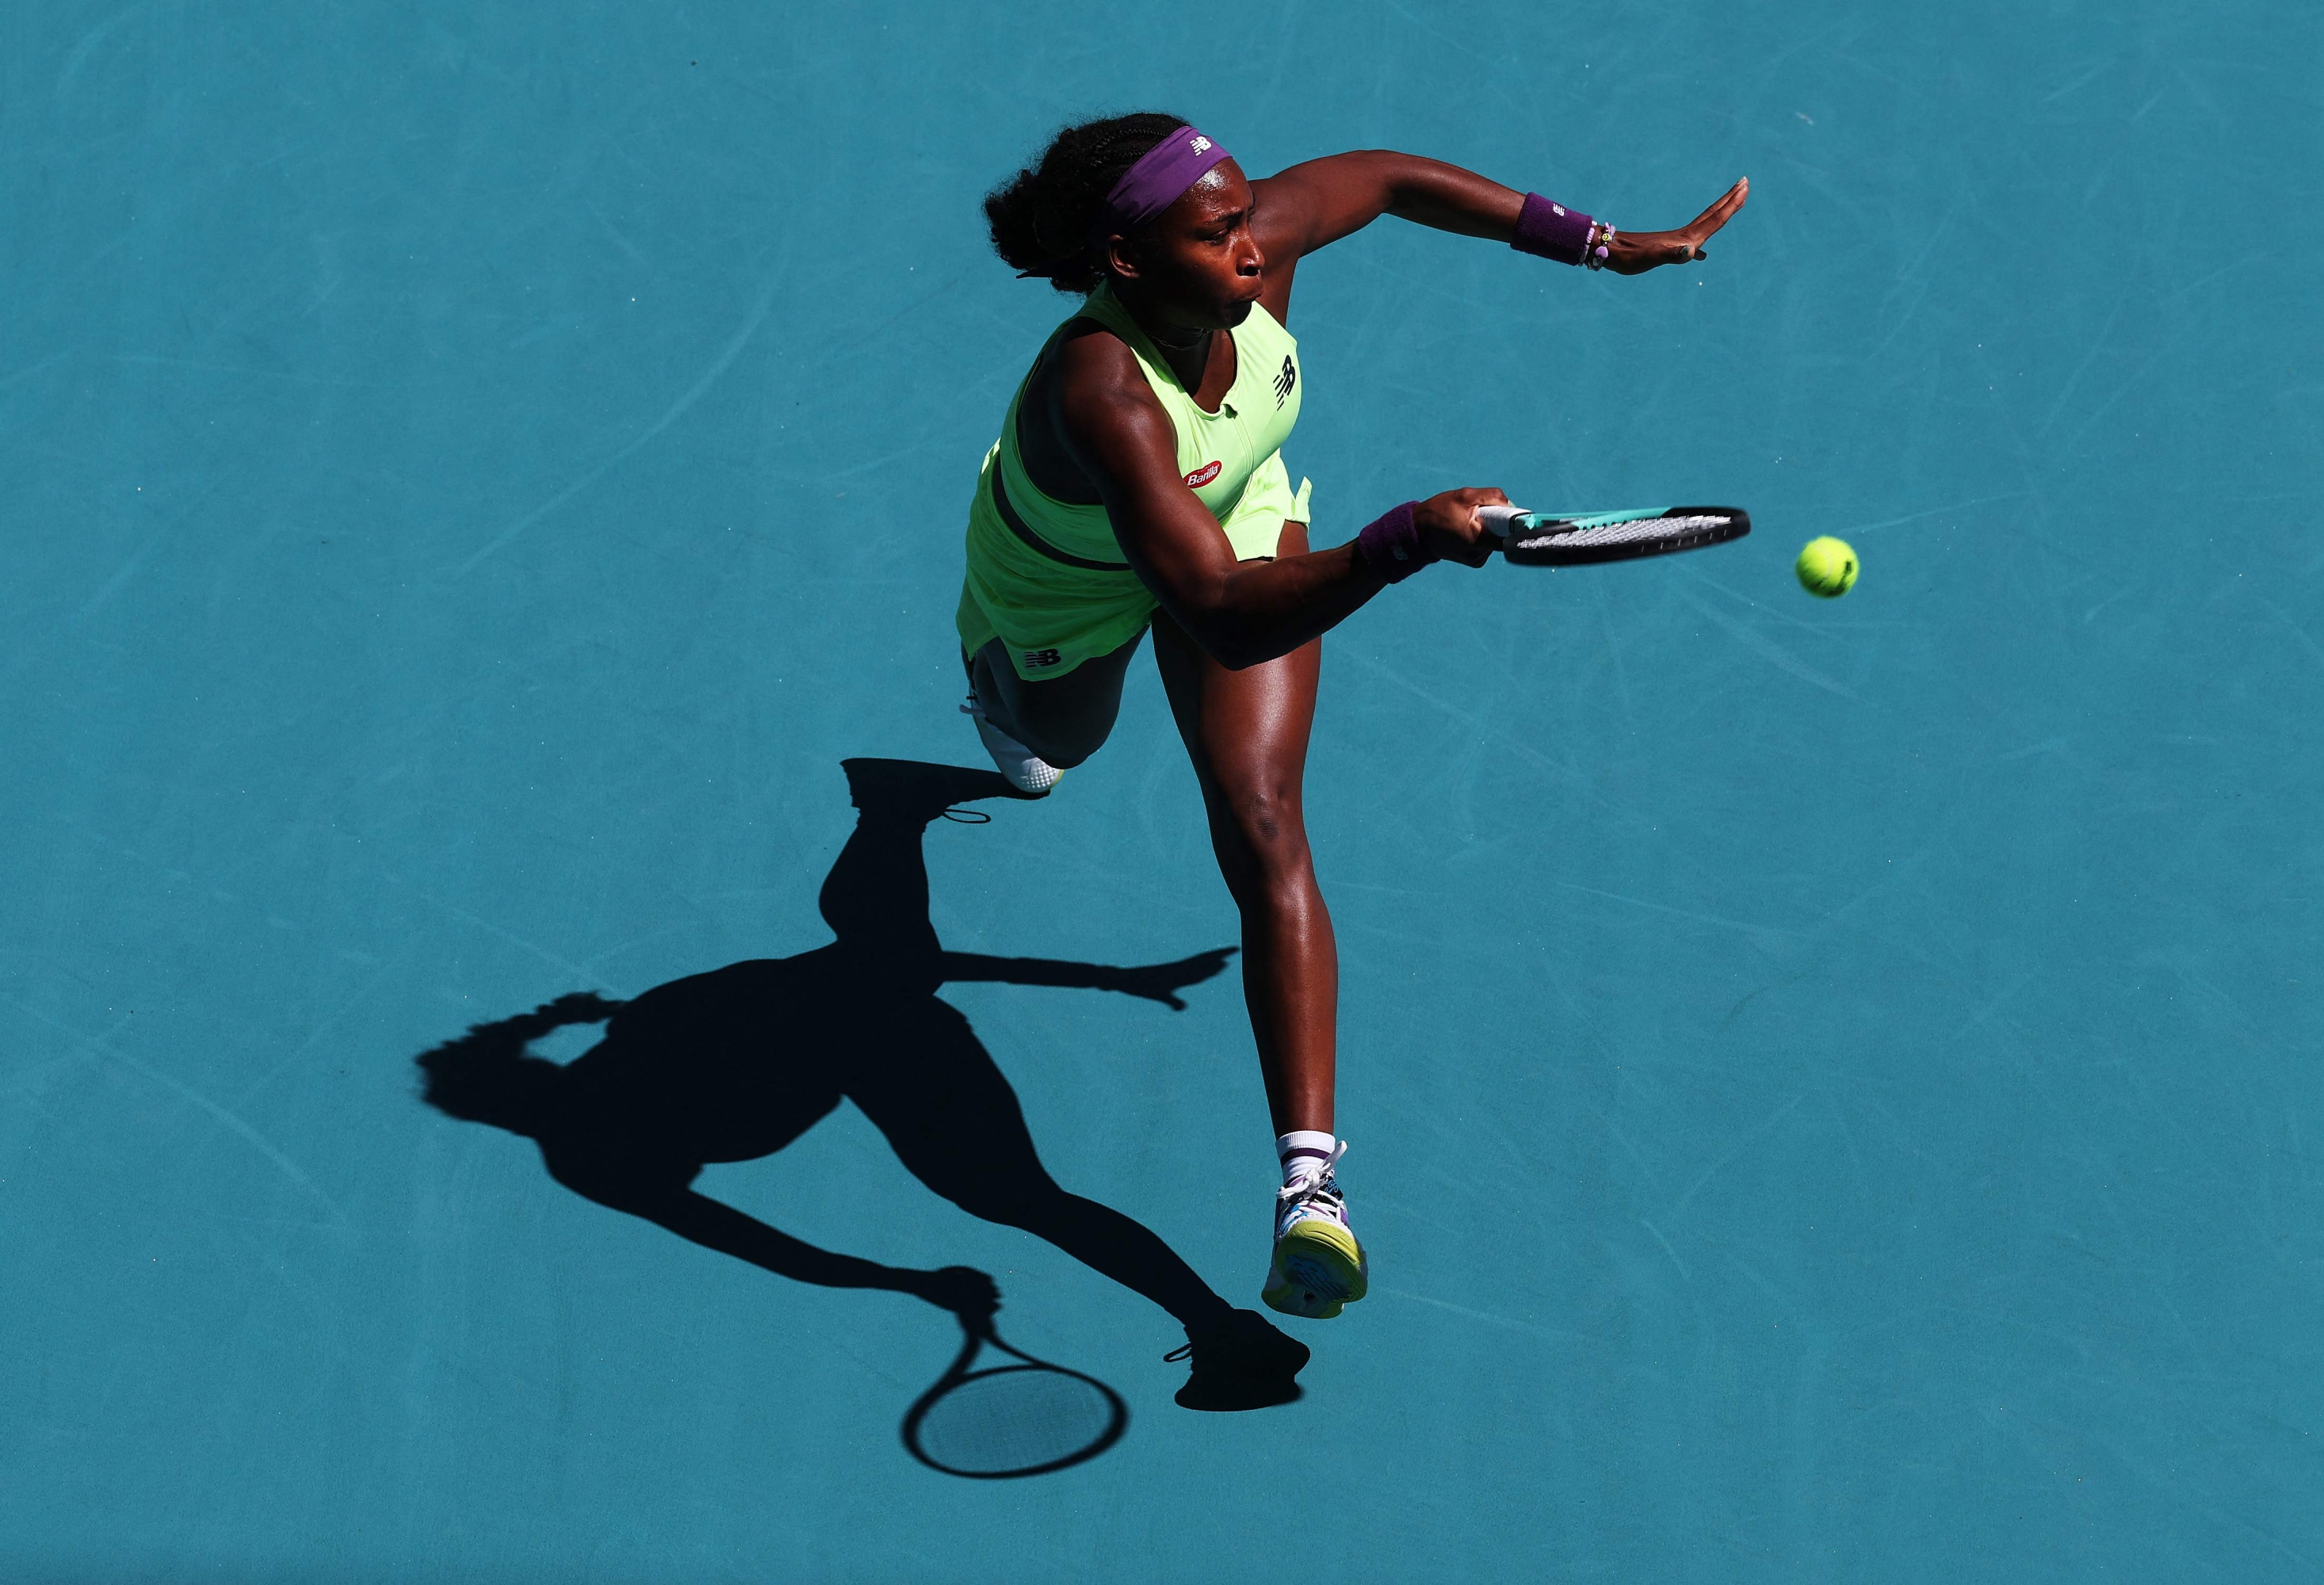 MIAMI GARDENS, FLORIDA - MARCH 24: Coco Gauff returns a shot against Oceane Dodin of France during their match on Day 9 of the Miami Open at Hard Rock Stadium on March 24, 2024 in Miami Gardens, Florida.   Al Bello/Getty Images/AFP (Photo by AL BELLO / GETTY IMAGES NORTH AMERICA / Getty Images via AFP)